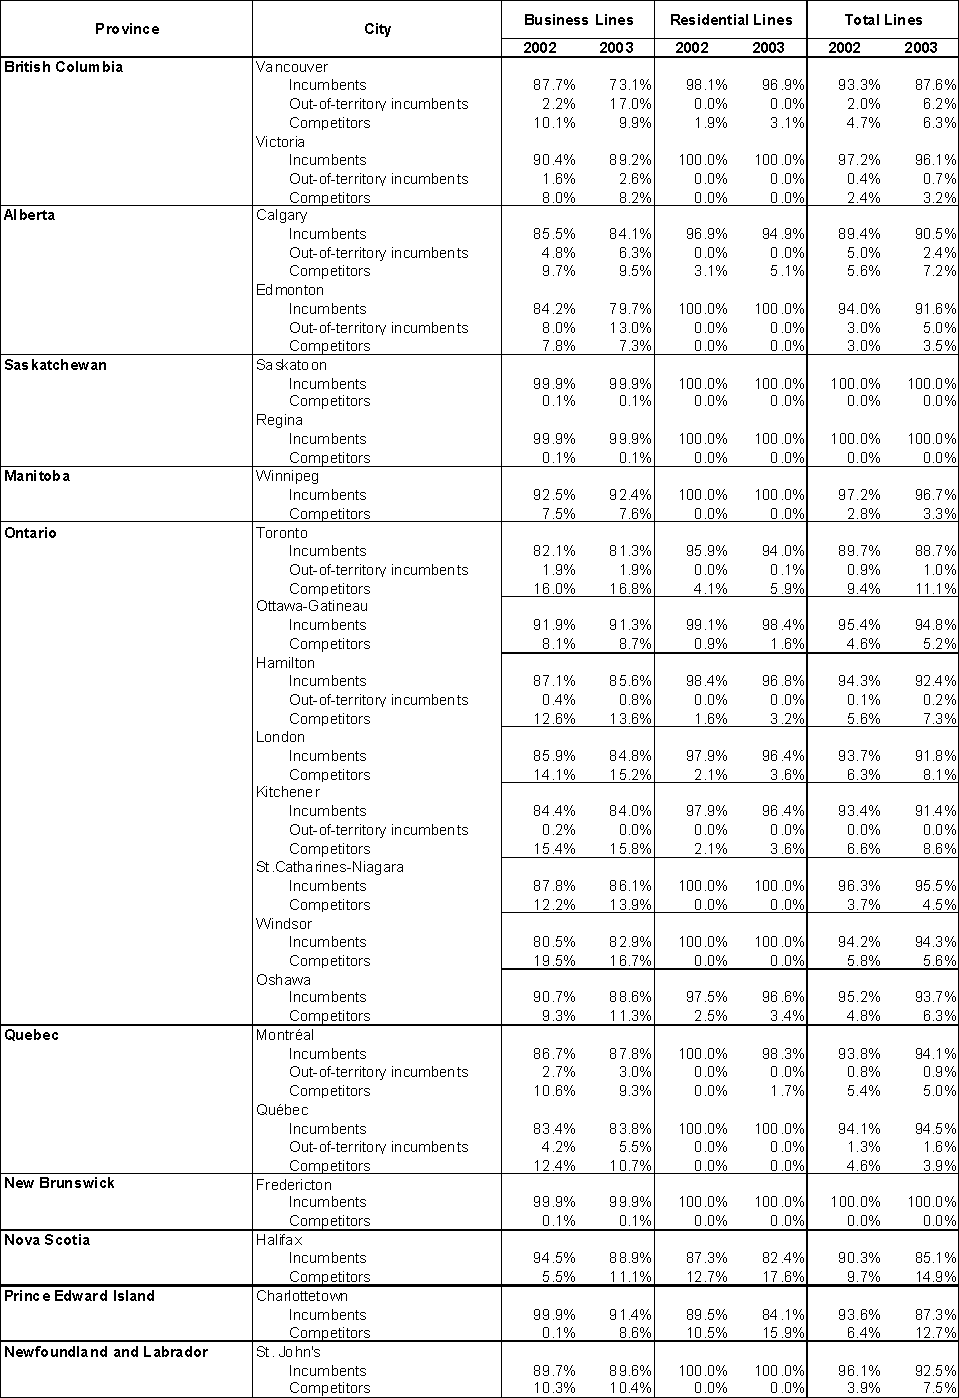 Table displaying the market share of business and residential local lines held by incumbents, out-of-territory incumbents and competitors within major Canadian cities in 2003.